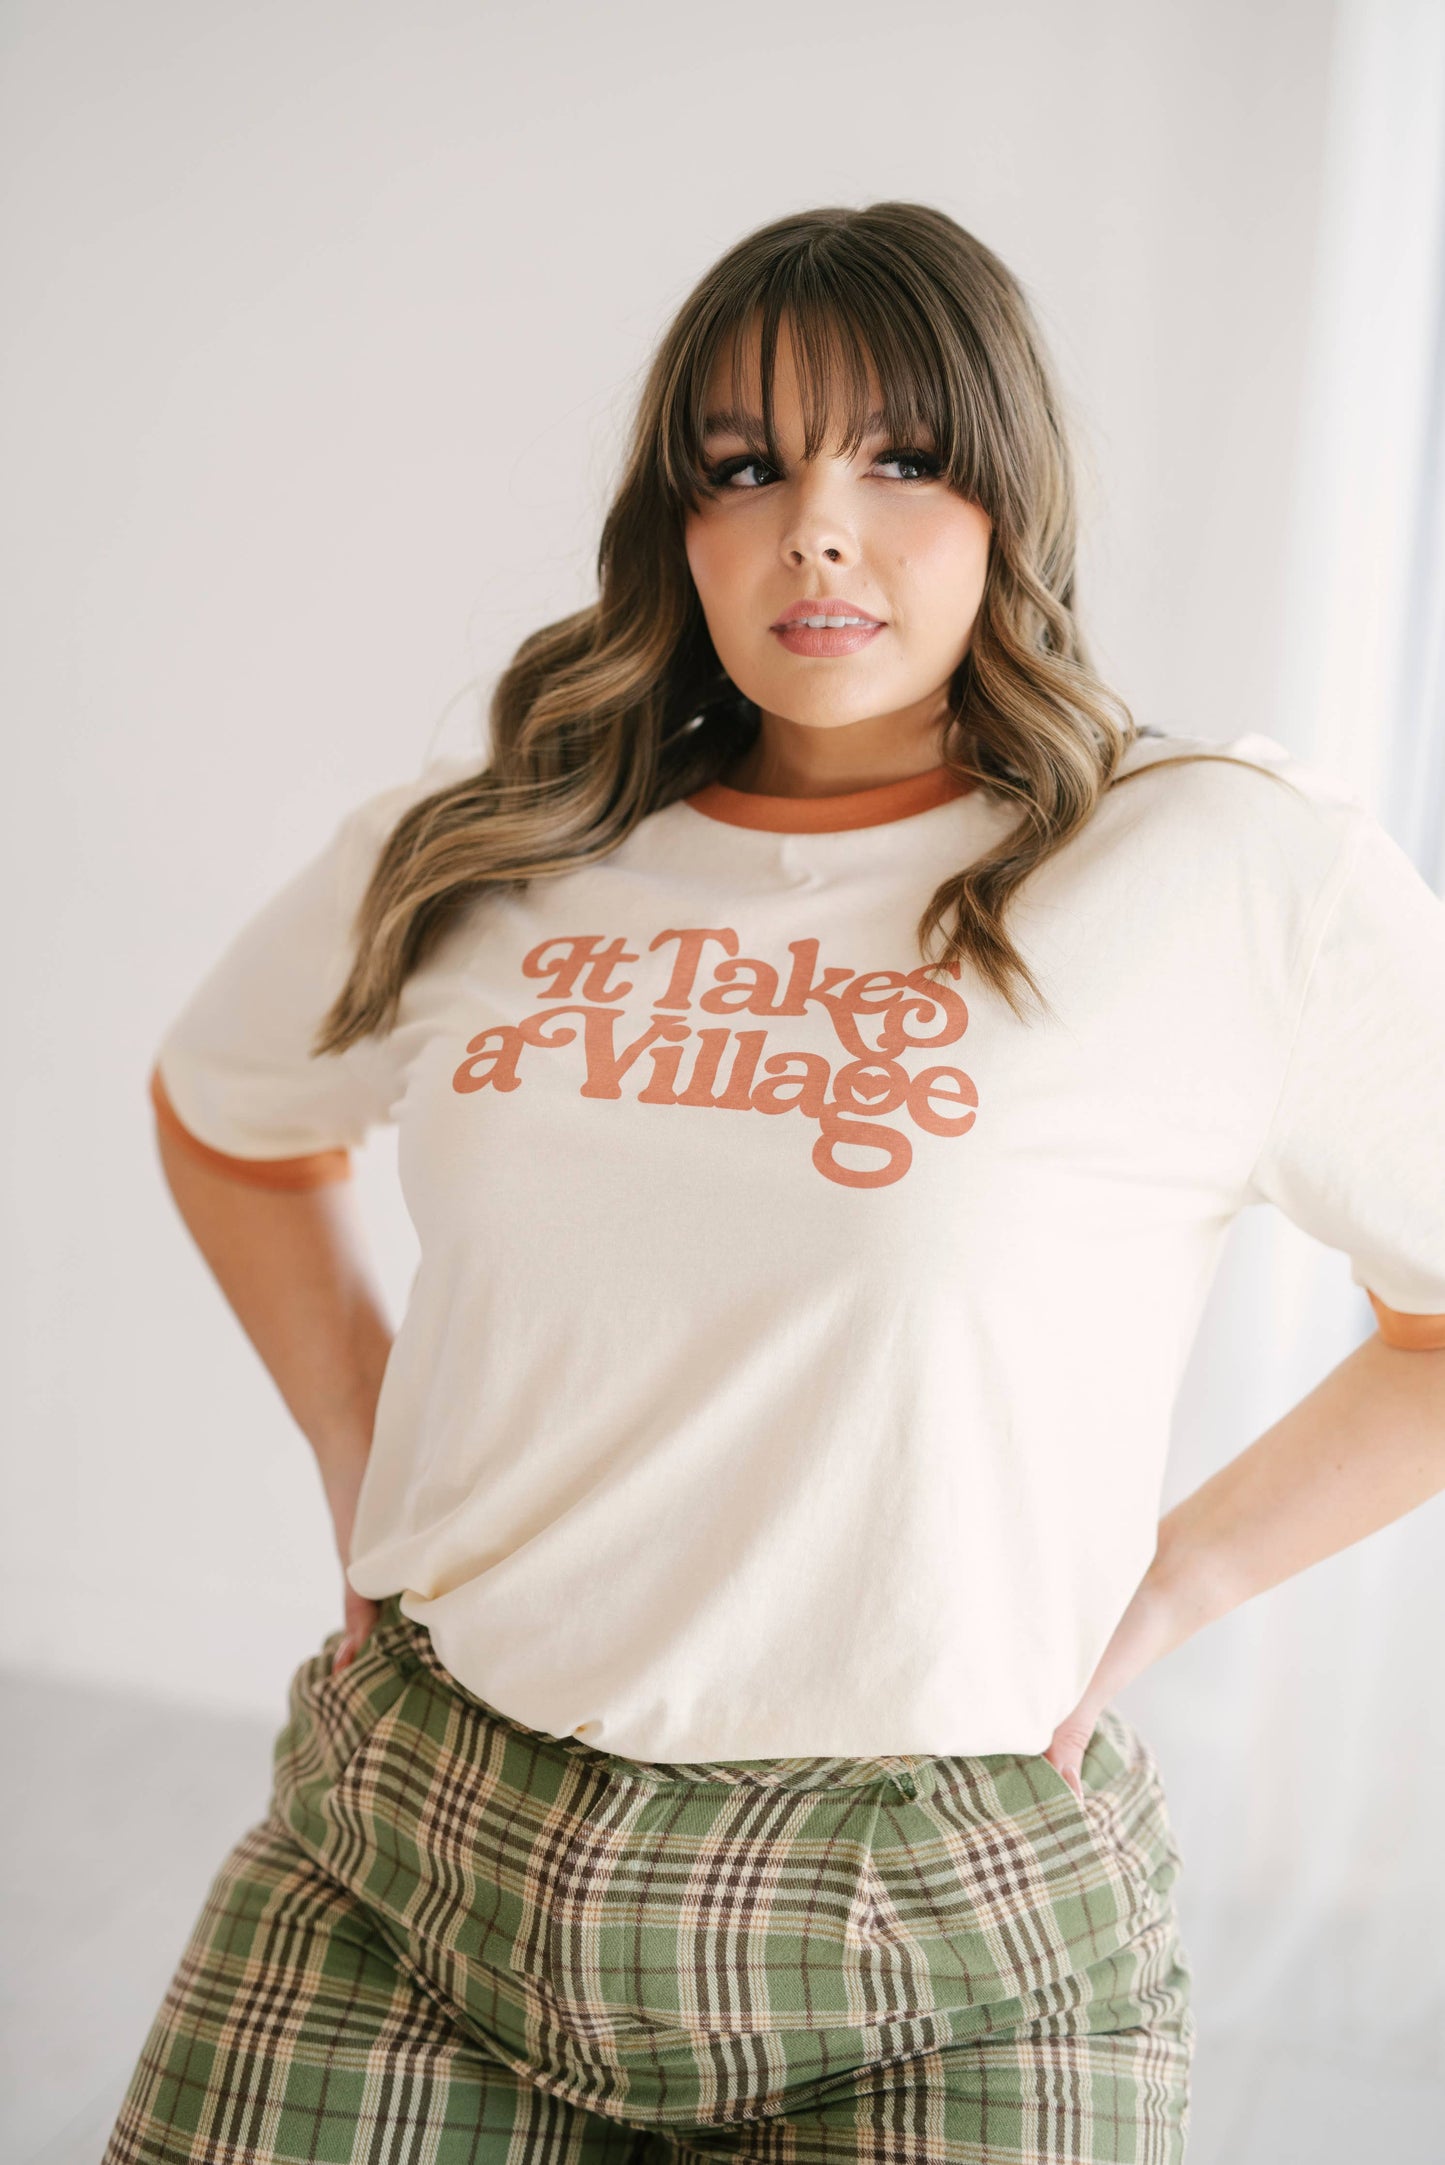 It Takes a Village, Womens Graphic Tee